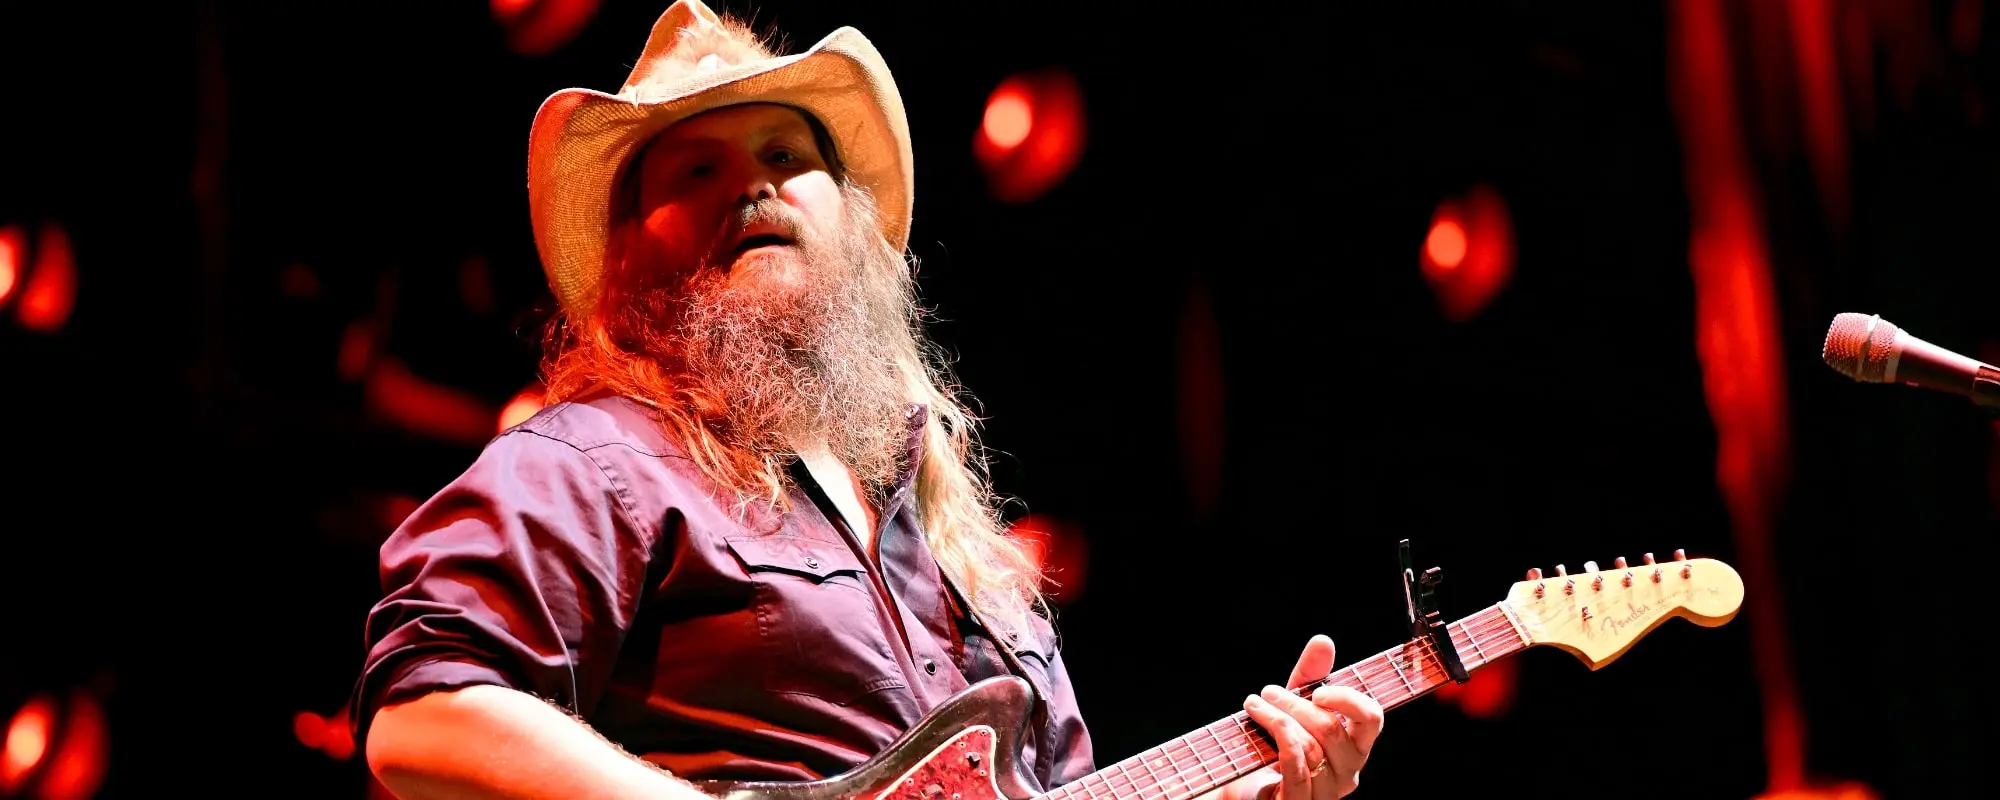 NFL Fans Are Obsessing Over Chris Stapleton’s Playoff Theme Song on ESPN